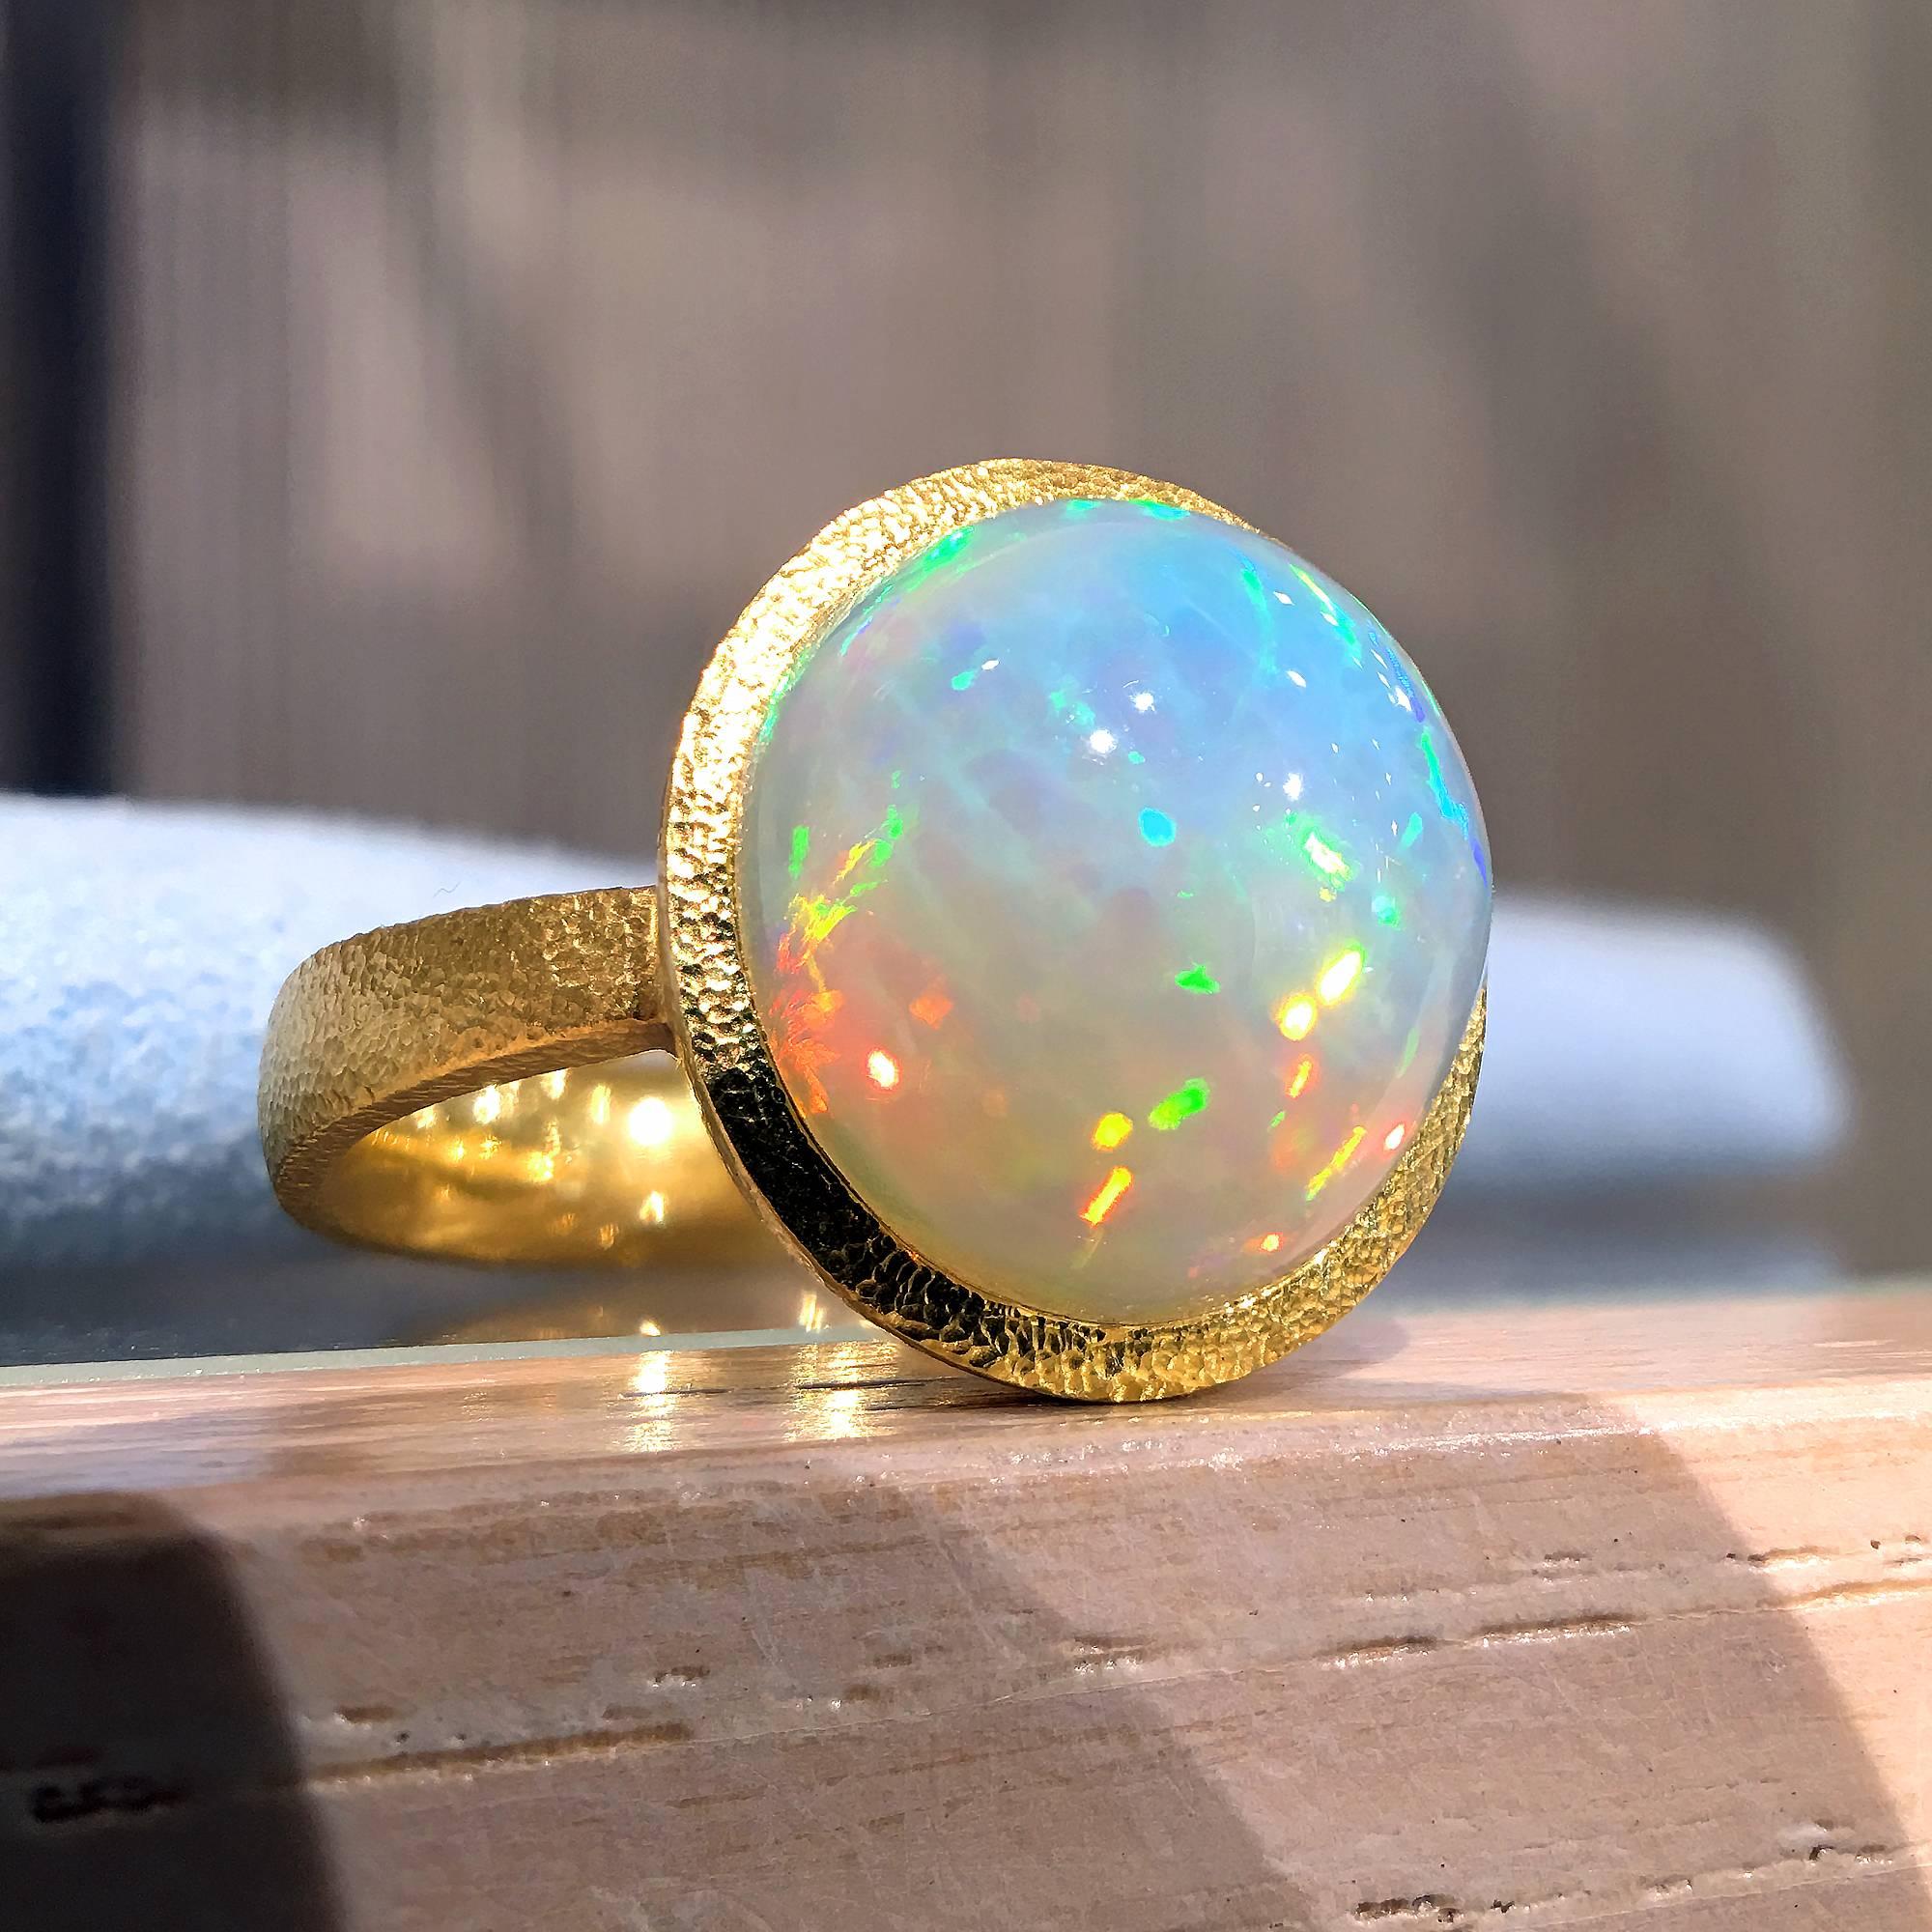 One of a Kind Ring handcrafted by acclaimed jewelry designer Devta Doolan featuring a breathtaking, completely natural translucent Ethiopian white opal(12.5mm x 11.5mm) with strong primary flashes of electrifying green and orange complemented by